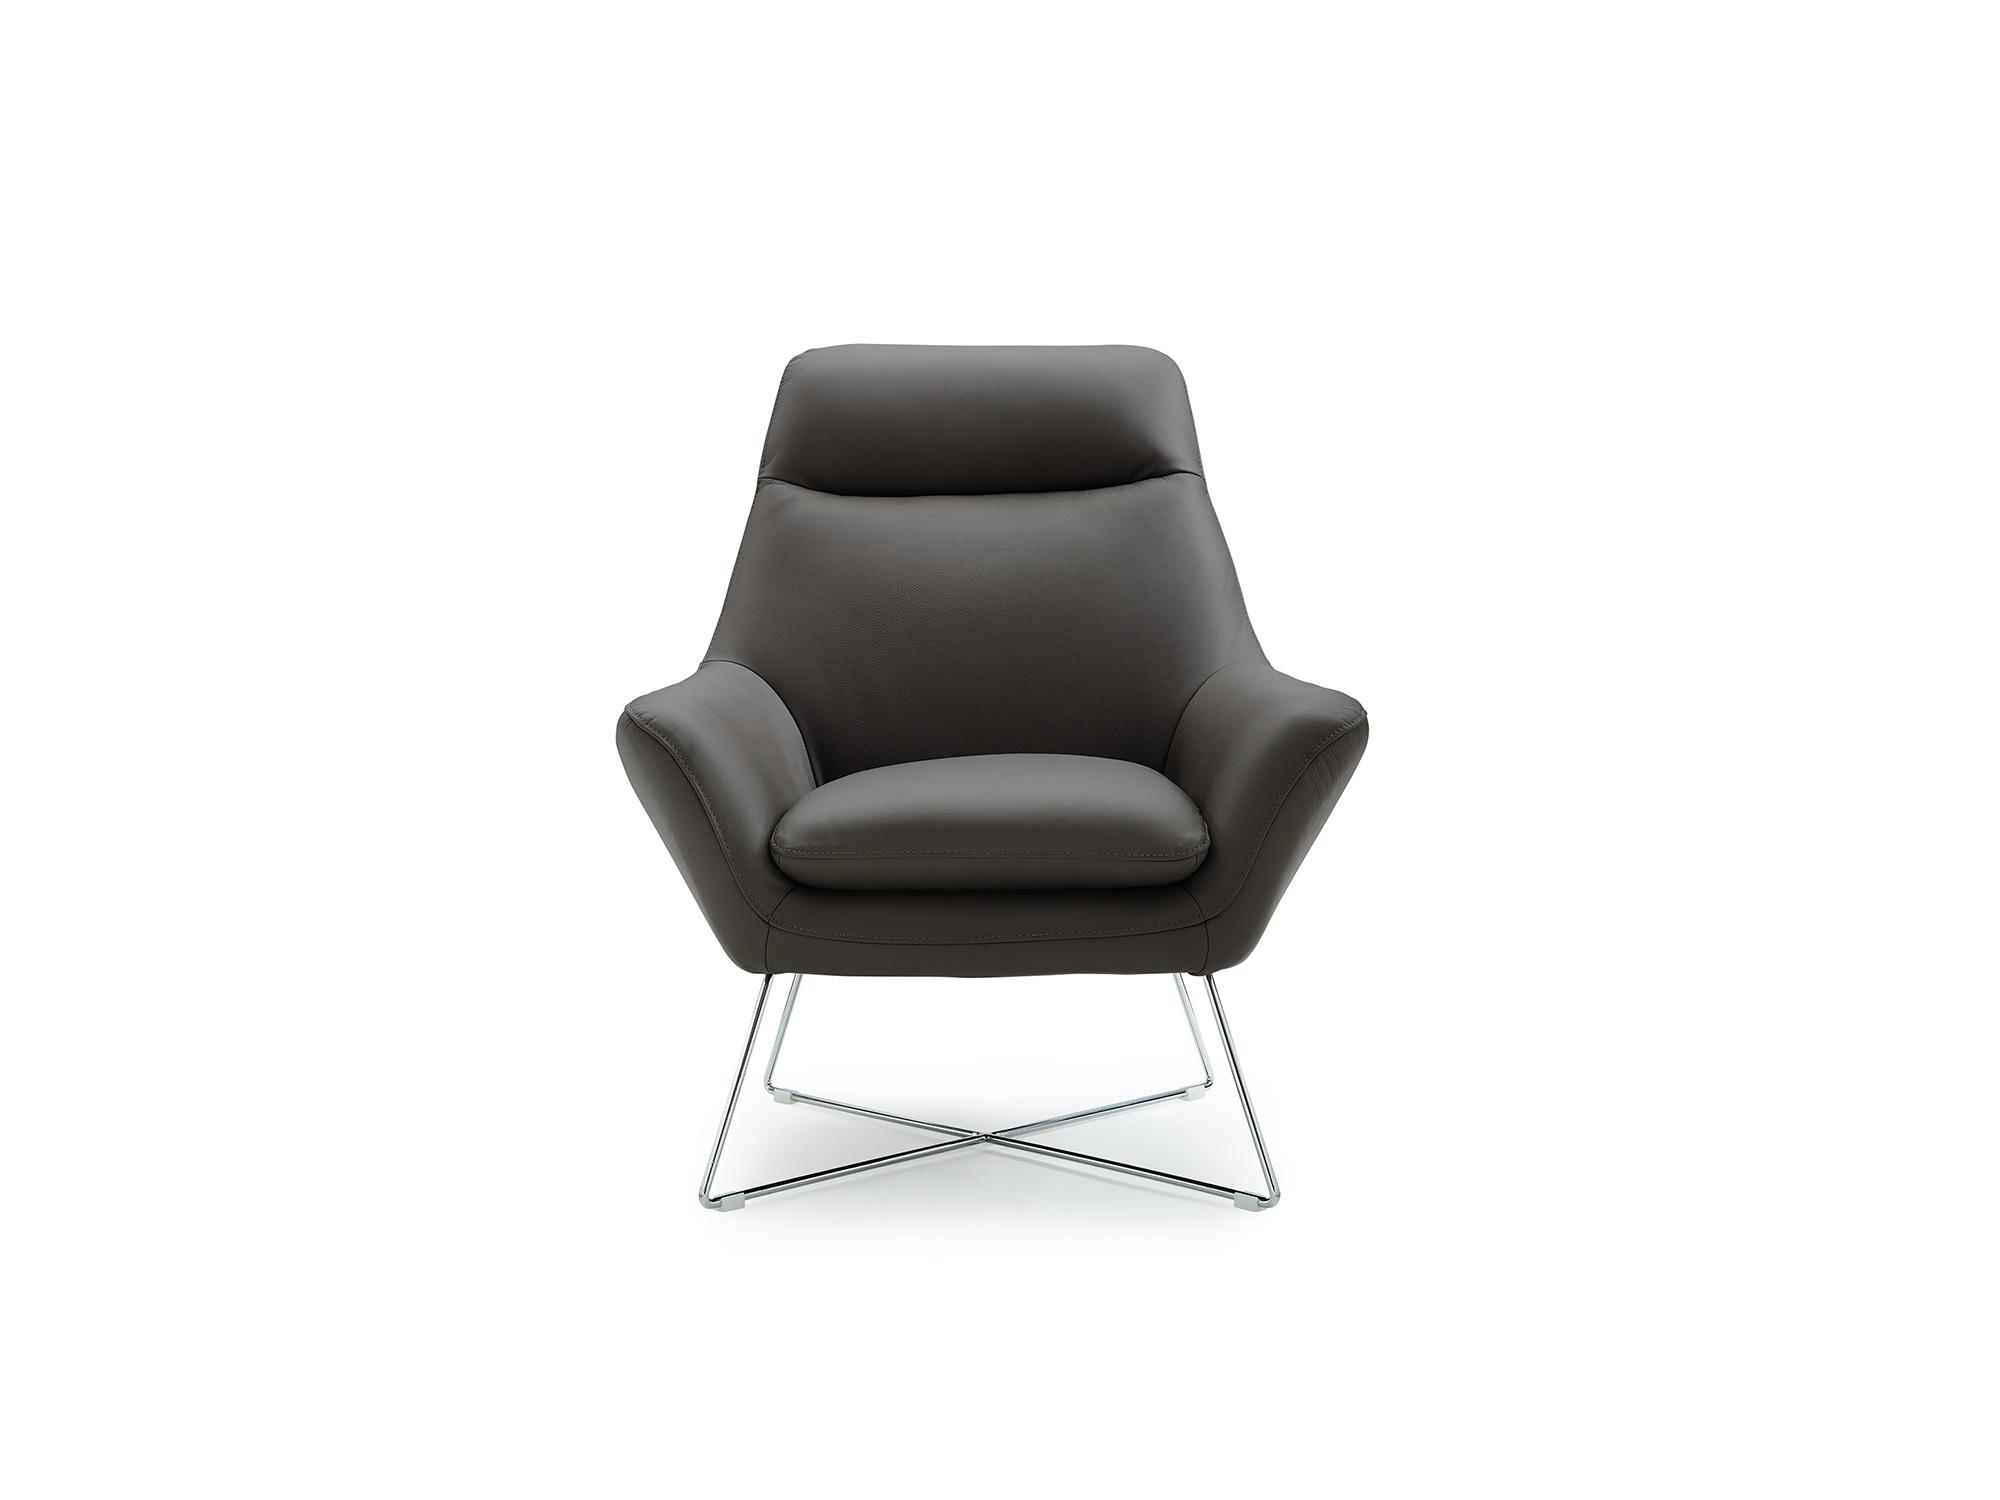 Modern Accent Chair CH1352L-DGRY Daiana CH1352L-DGRY in Dark Gray Top grain leather